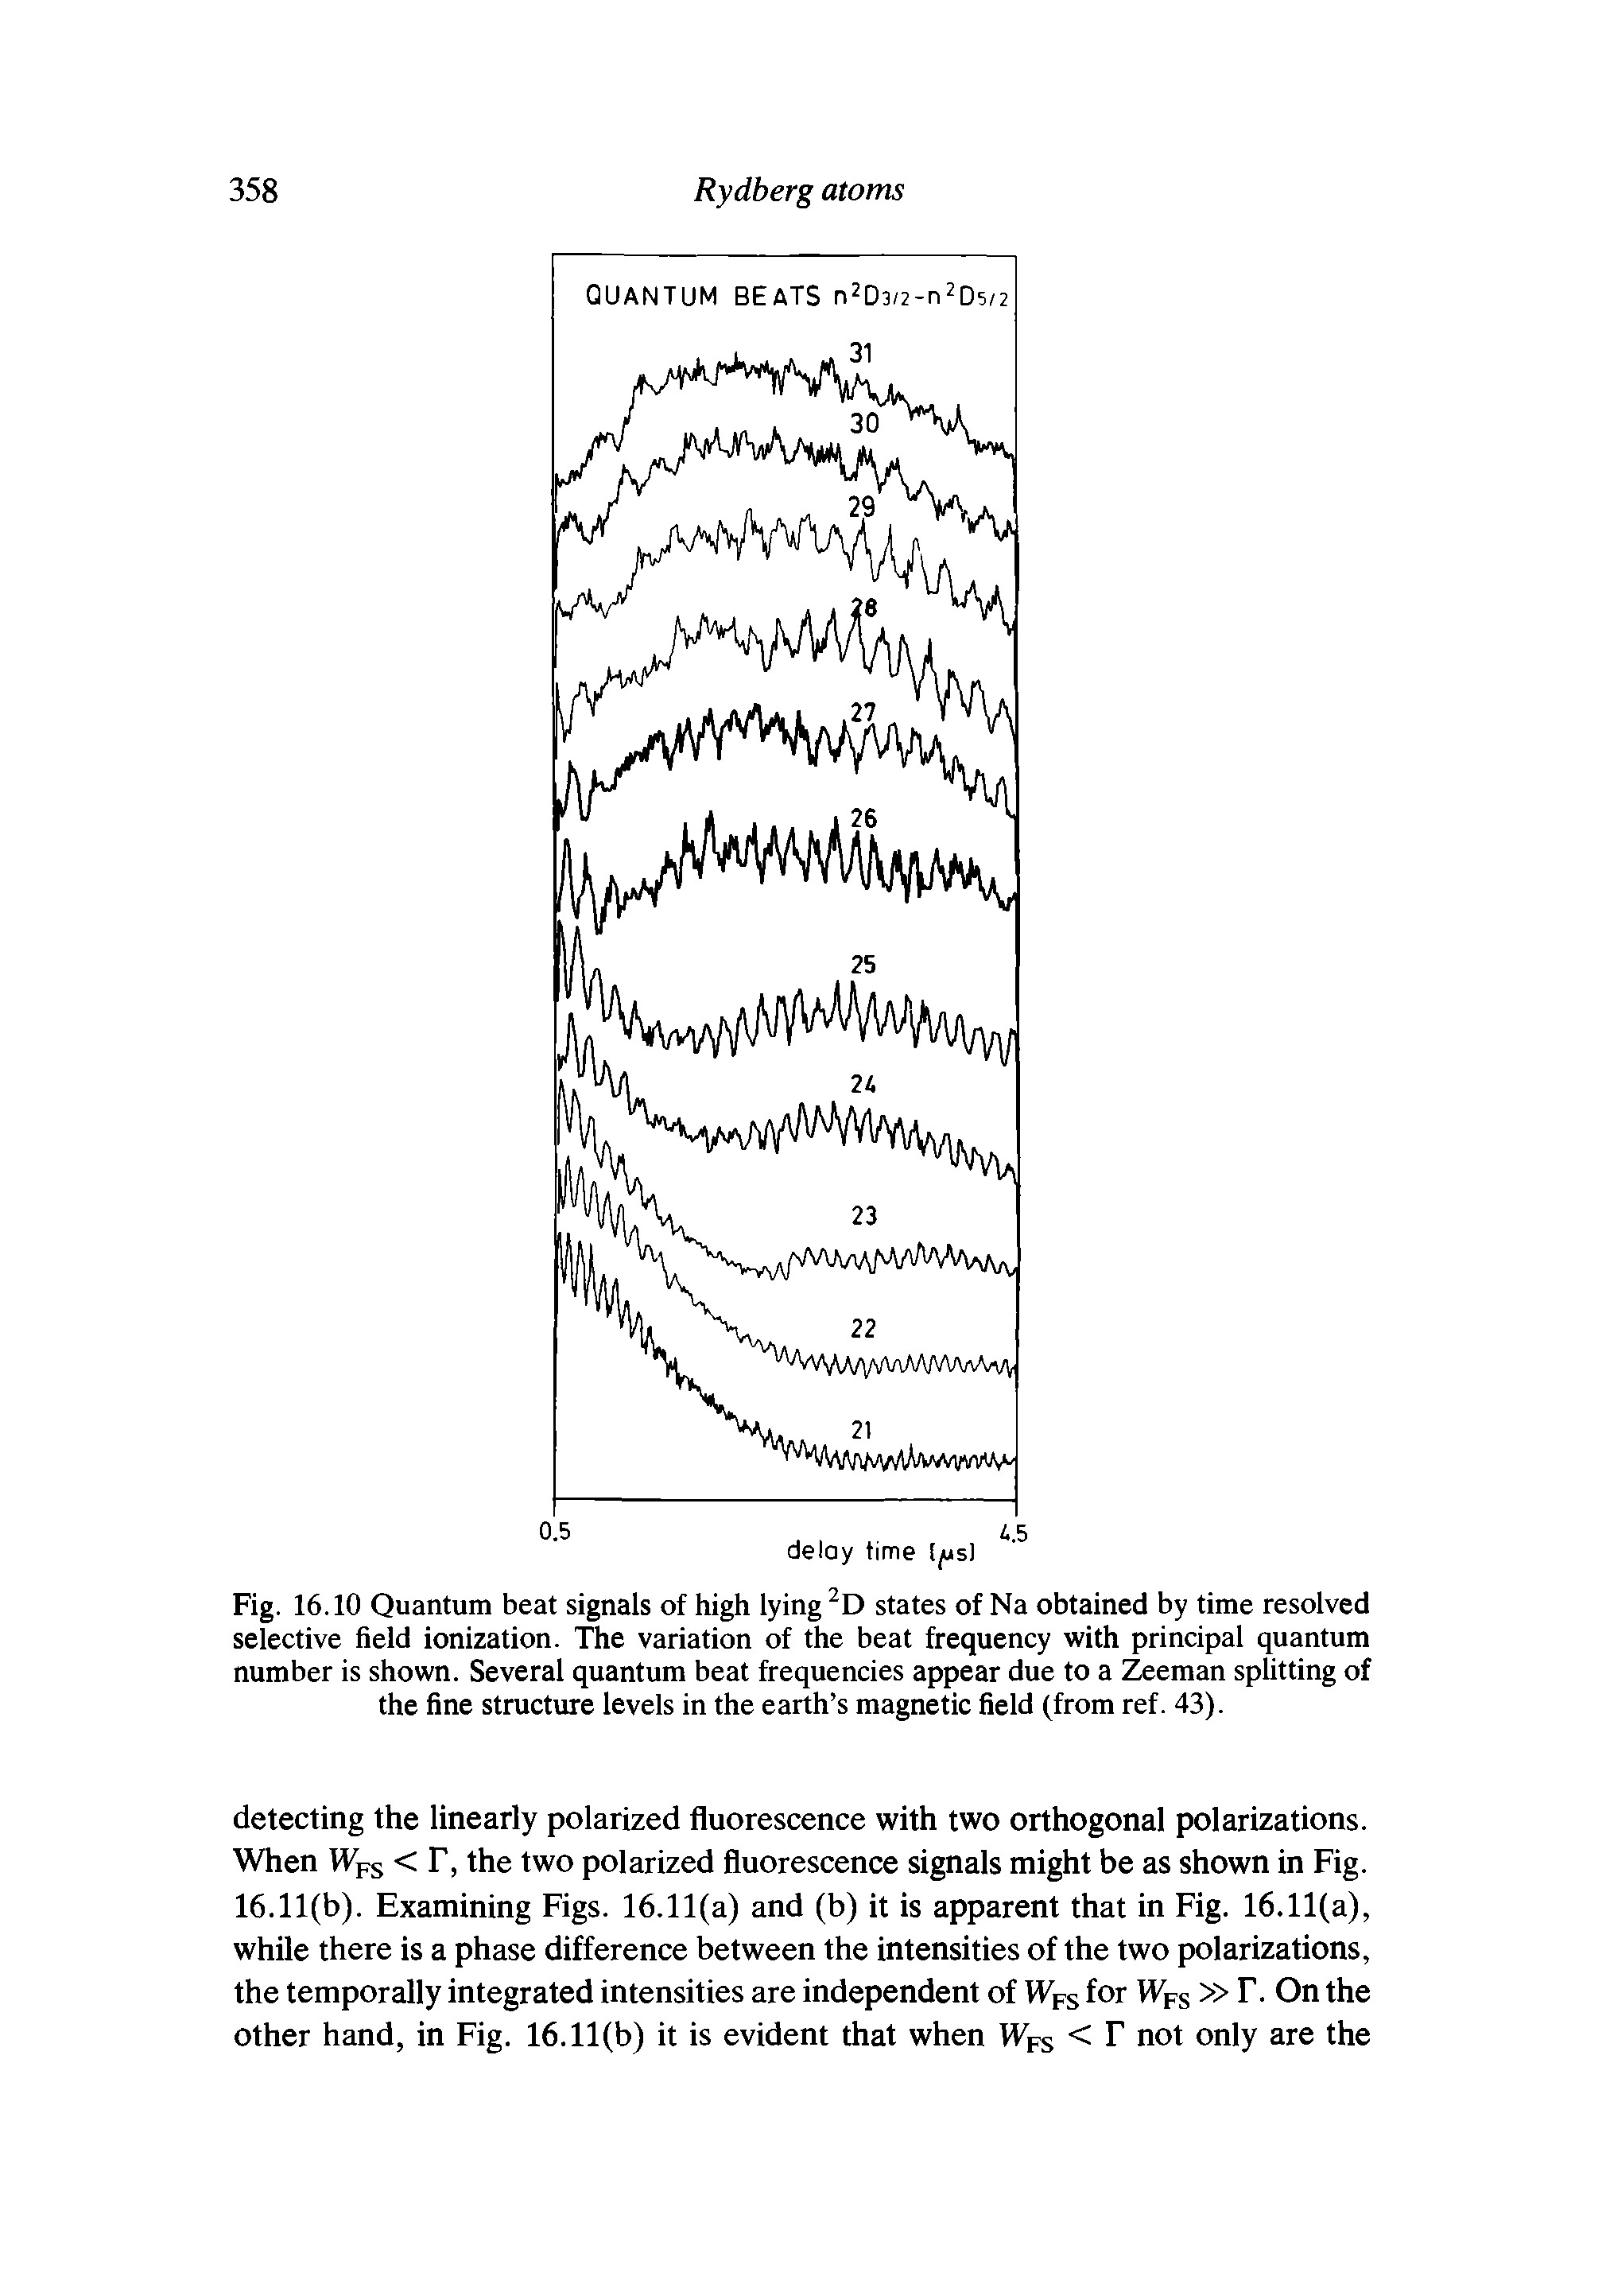 Fig. 16.10 Quantum beat signals of high lying 2D states of Na obtained by time resolved selective field ionization. The variation of the beat frequency with principal quantum number is shown. Several quantum beat frequencies appear due to a Zeeman splitting of the fine structure levels in the earth s magnetic field (from ref. 43).